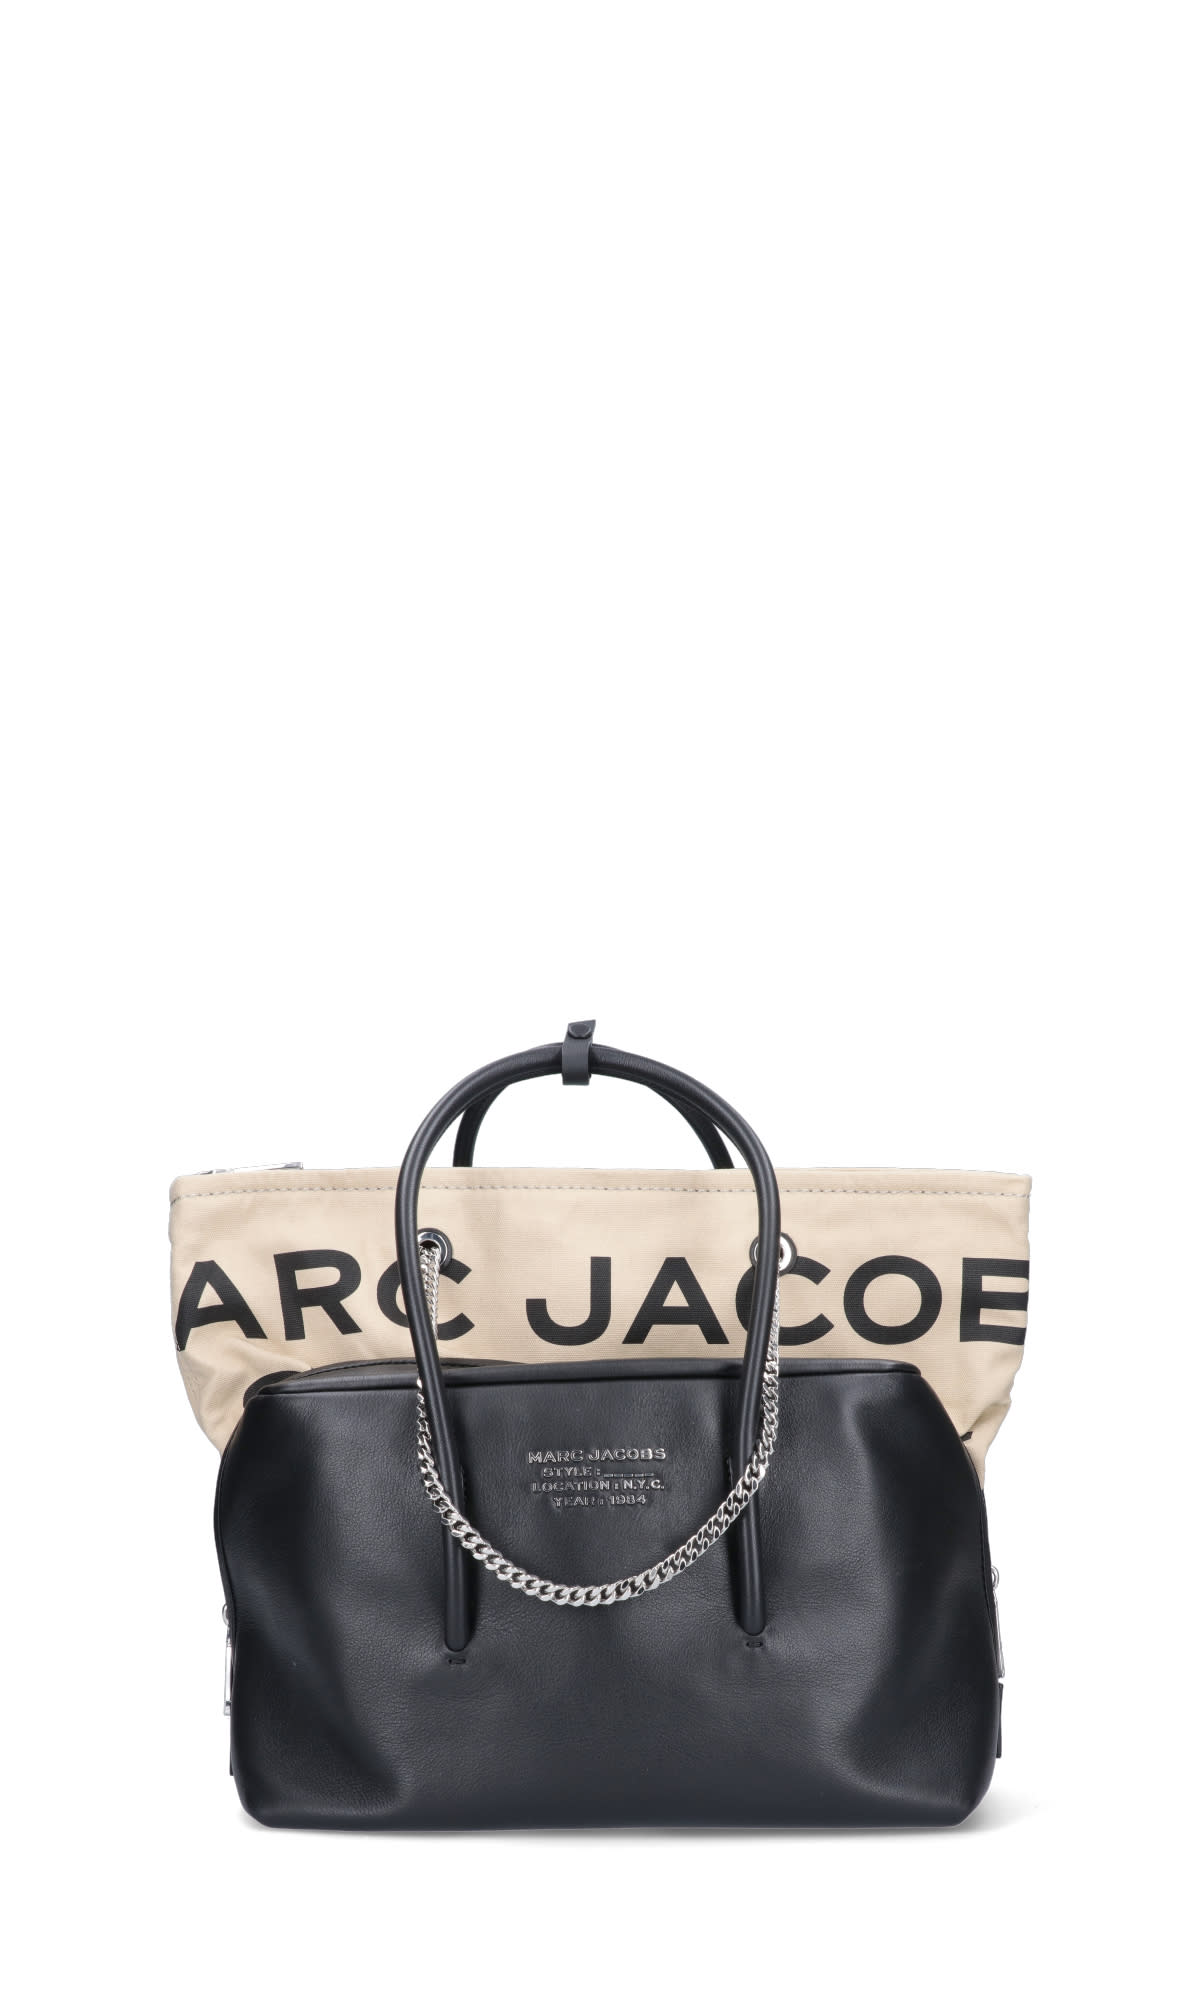 Marc Jacobs Tote In Black